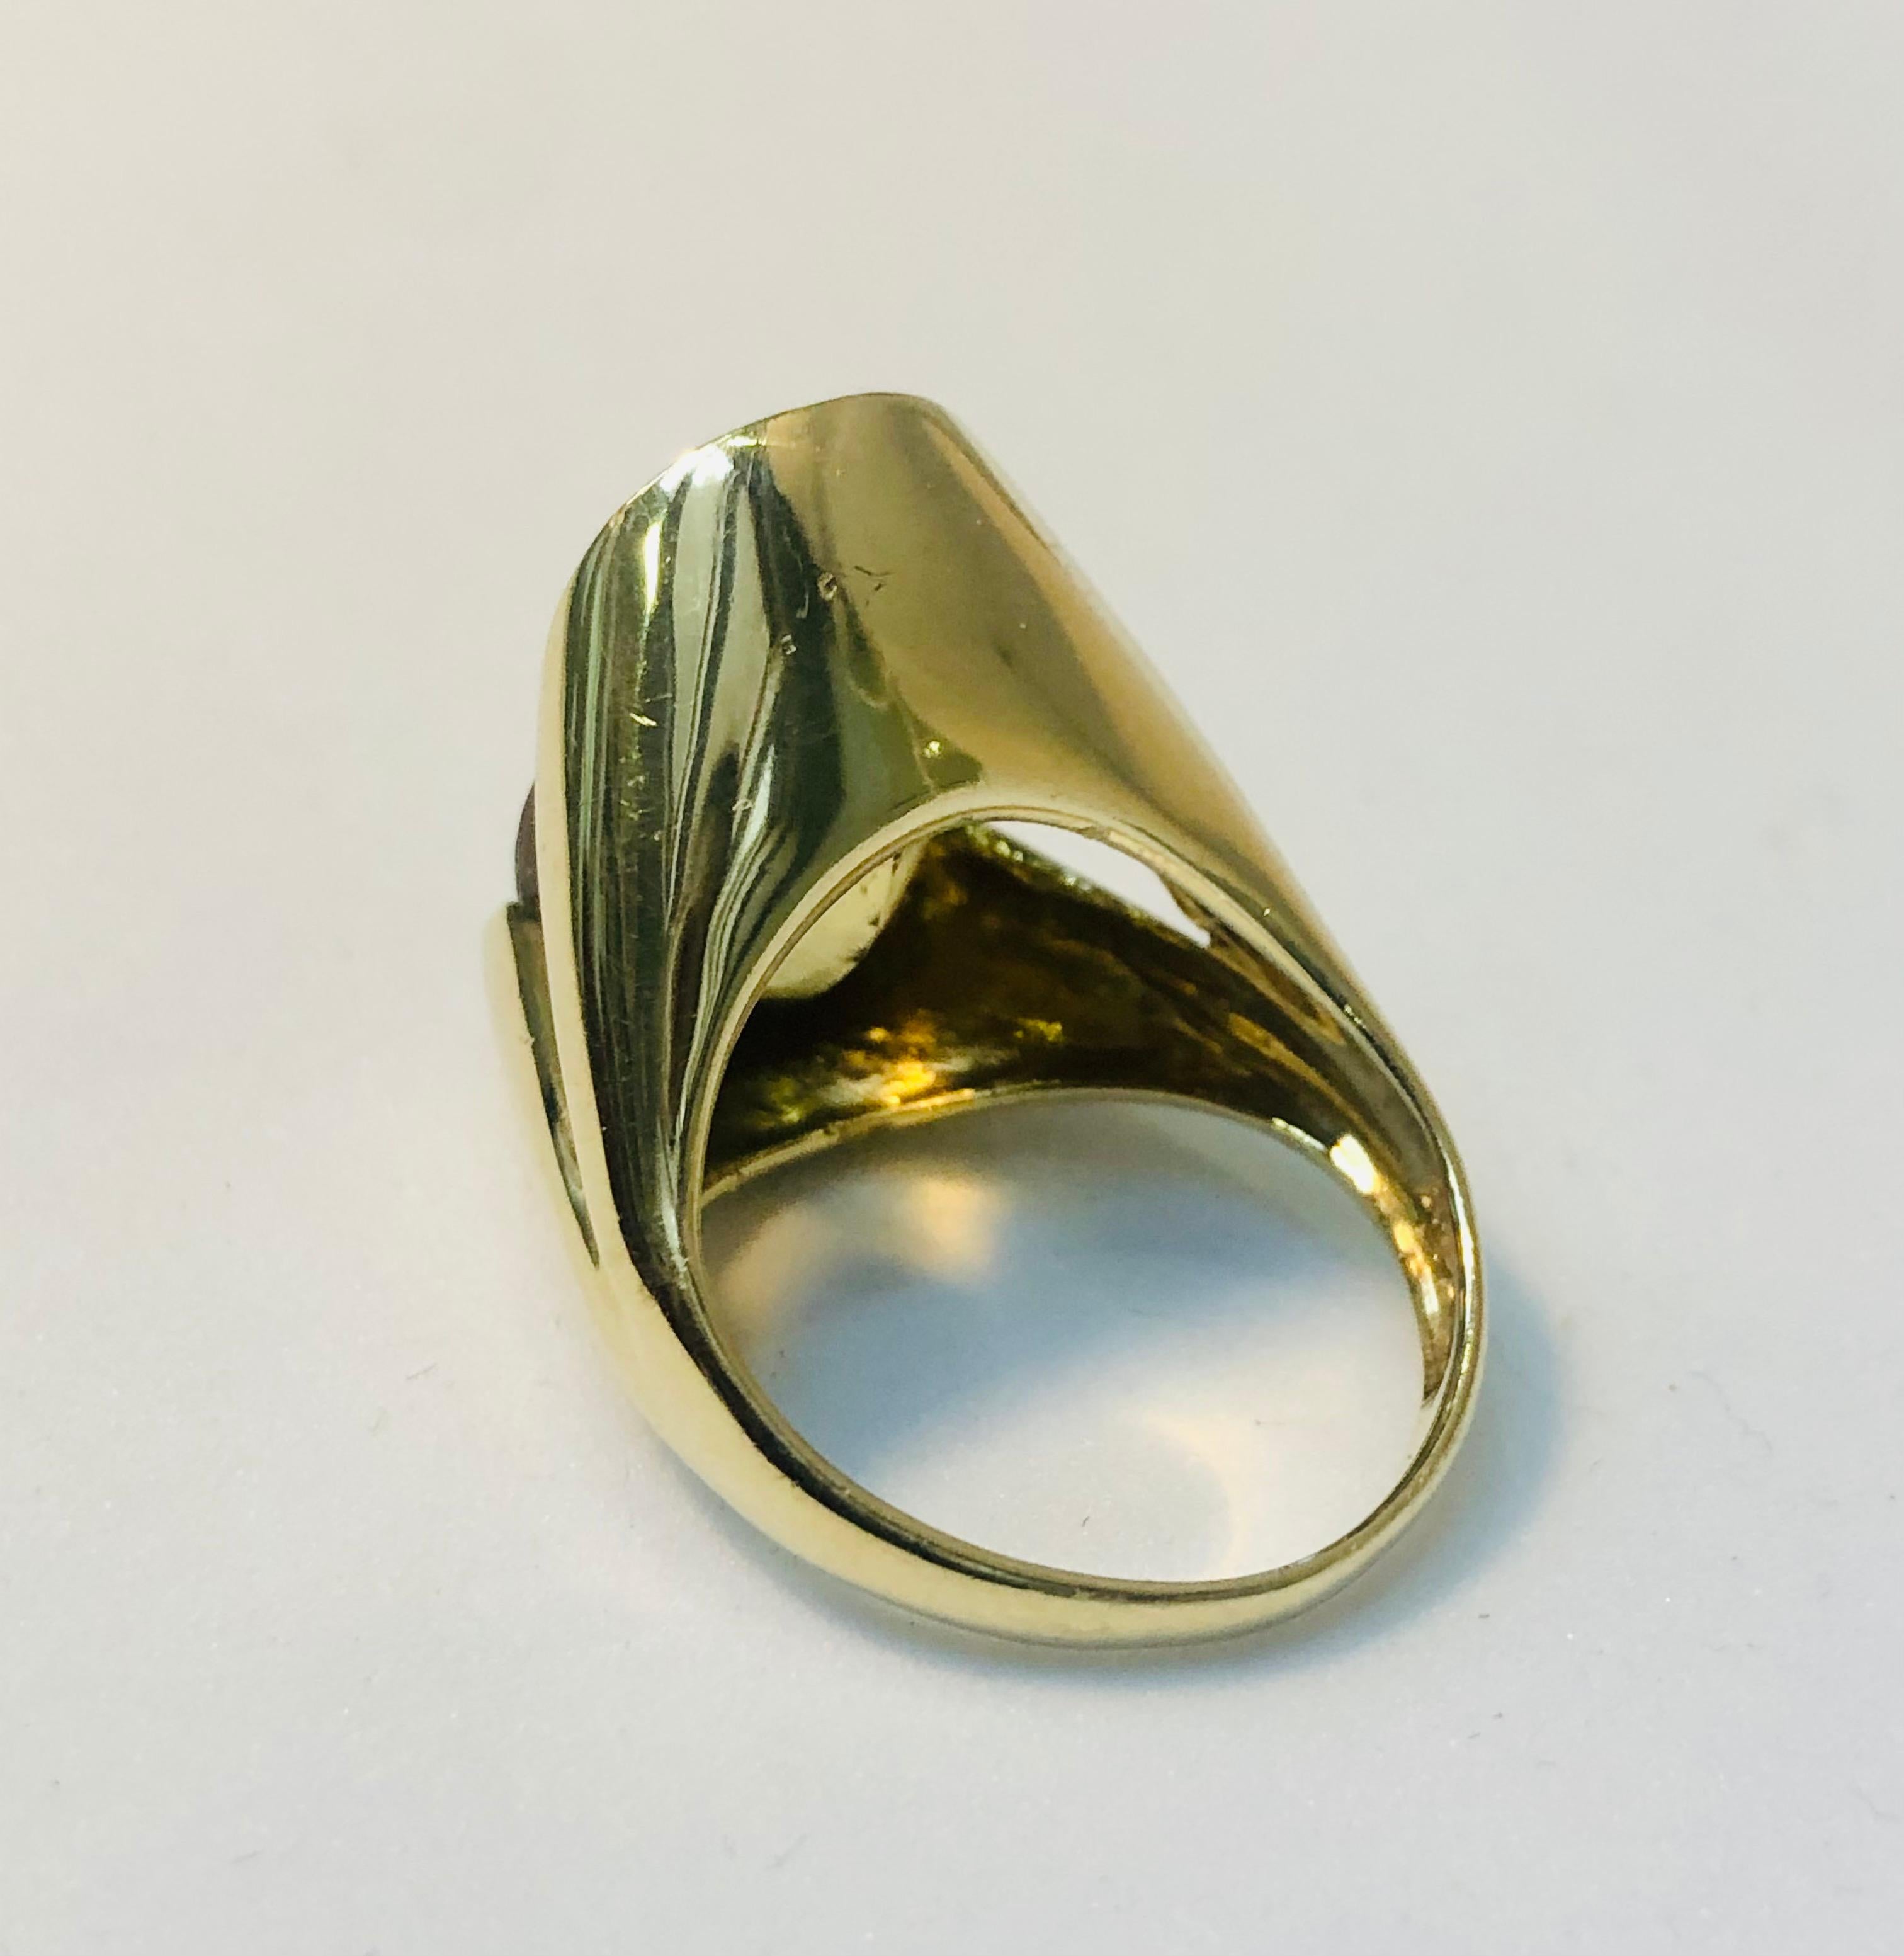 Contemporary Large Oval Citrine Cocktail Ring, 9 Karat Gold